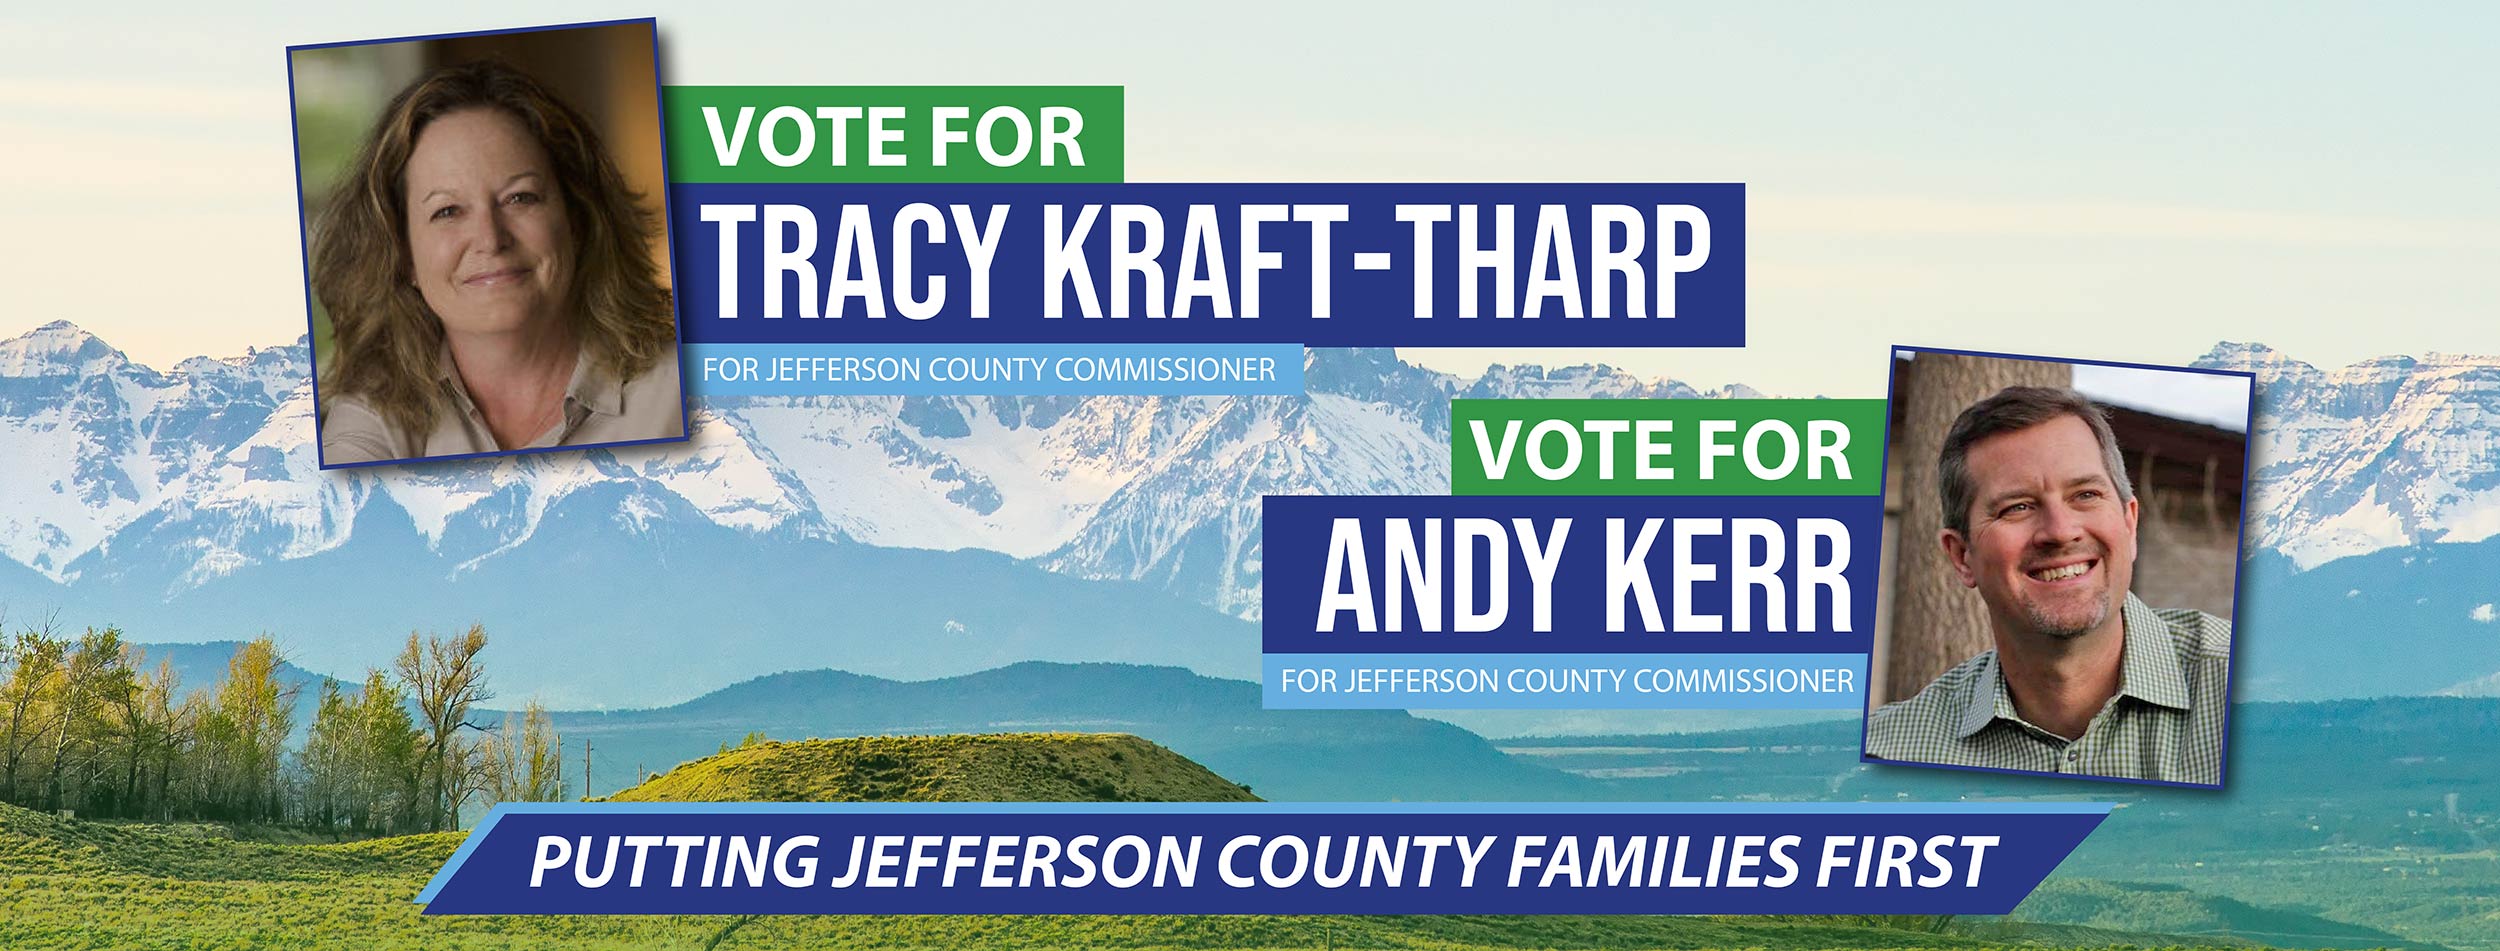 Vote for Tracy Kraft-Tharp & Andy Kerr